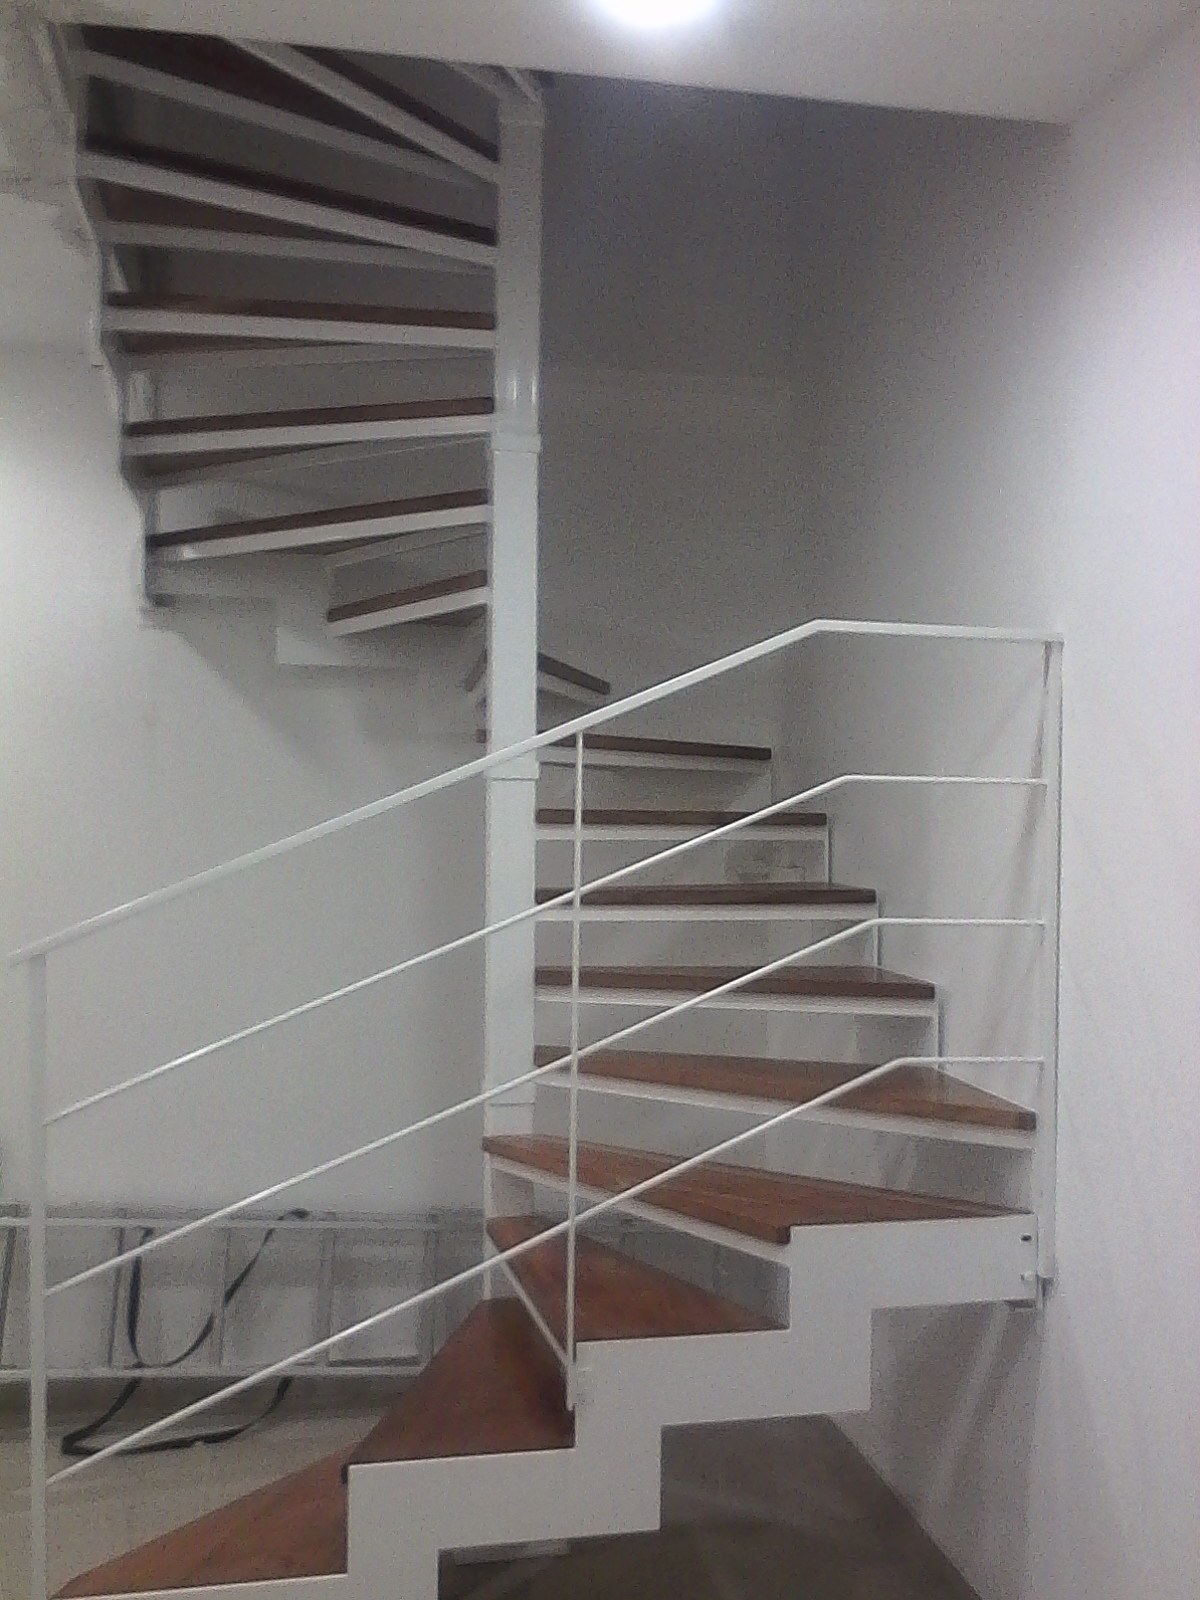 Staircases - Middlesea offices / Floriana